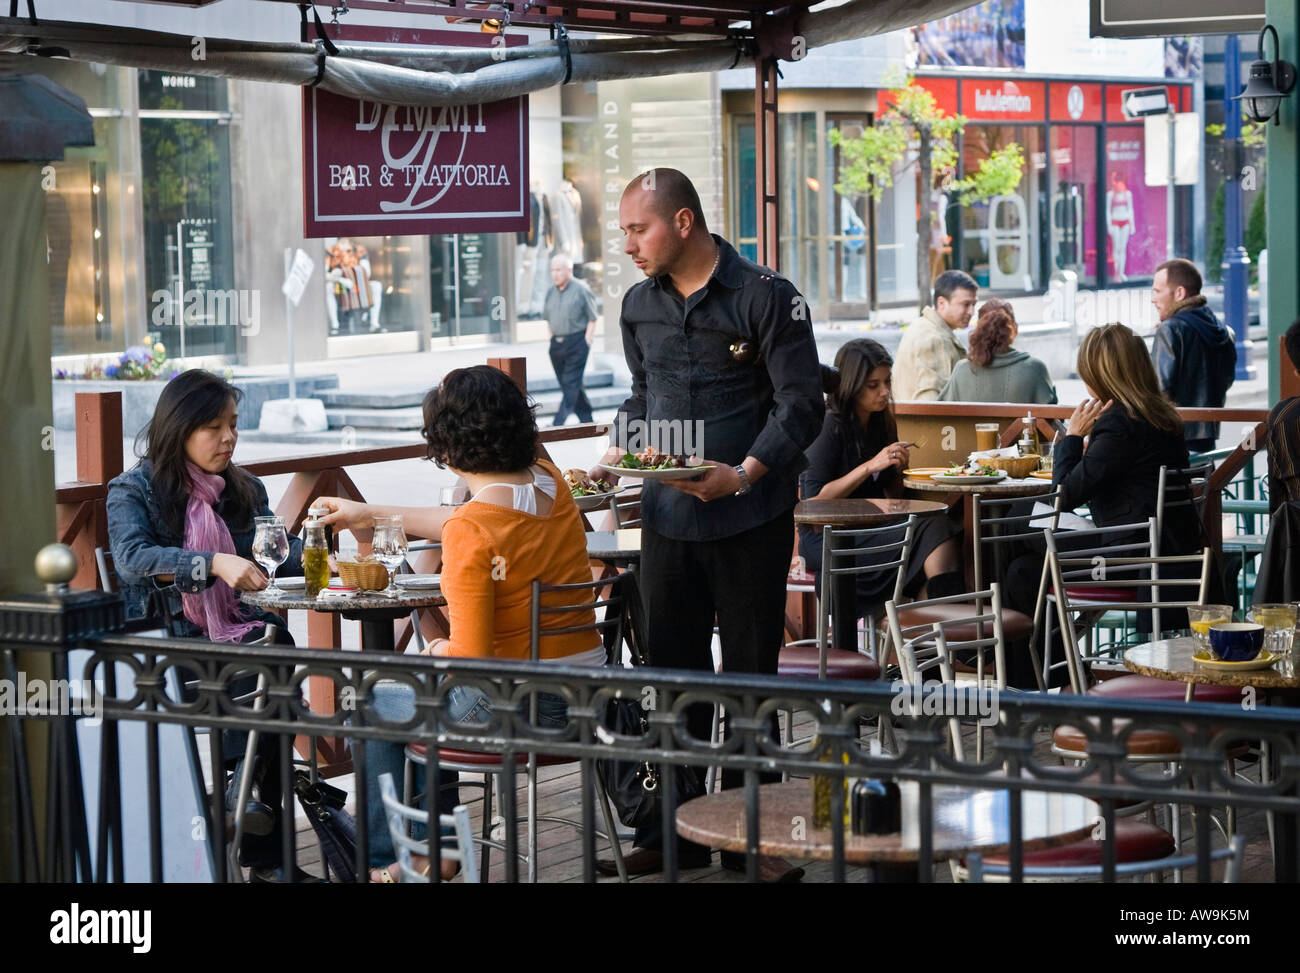 People dining at outdoor restaurant patio (part of 2 image sequence). Stock Photo